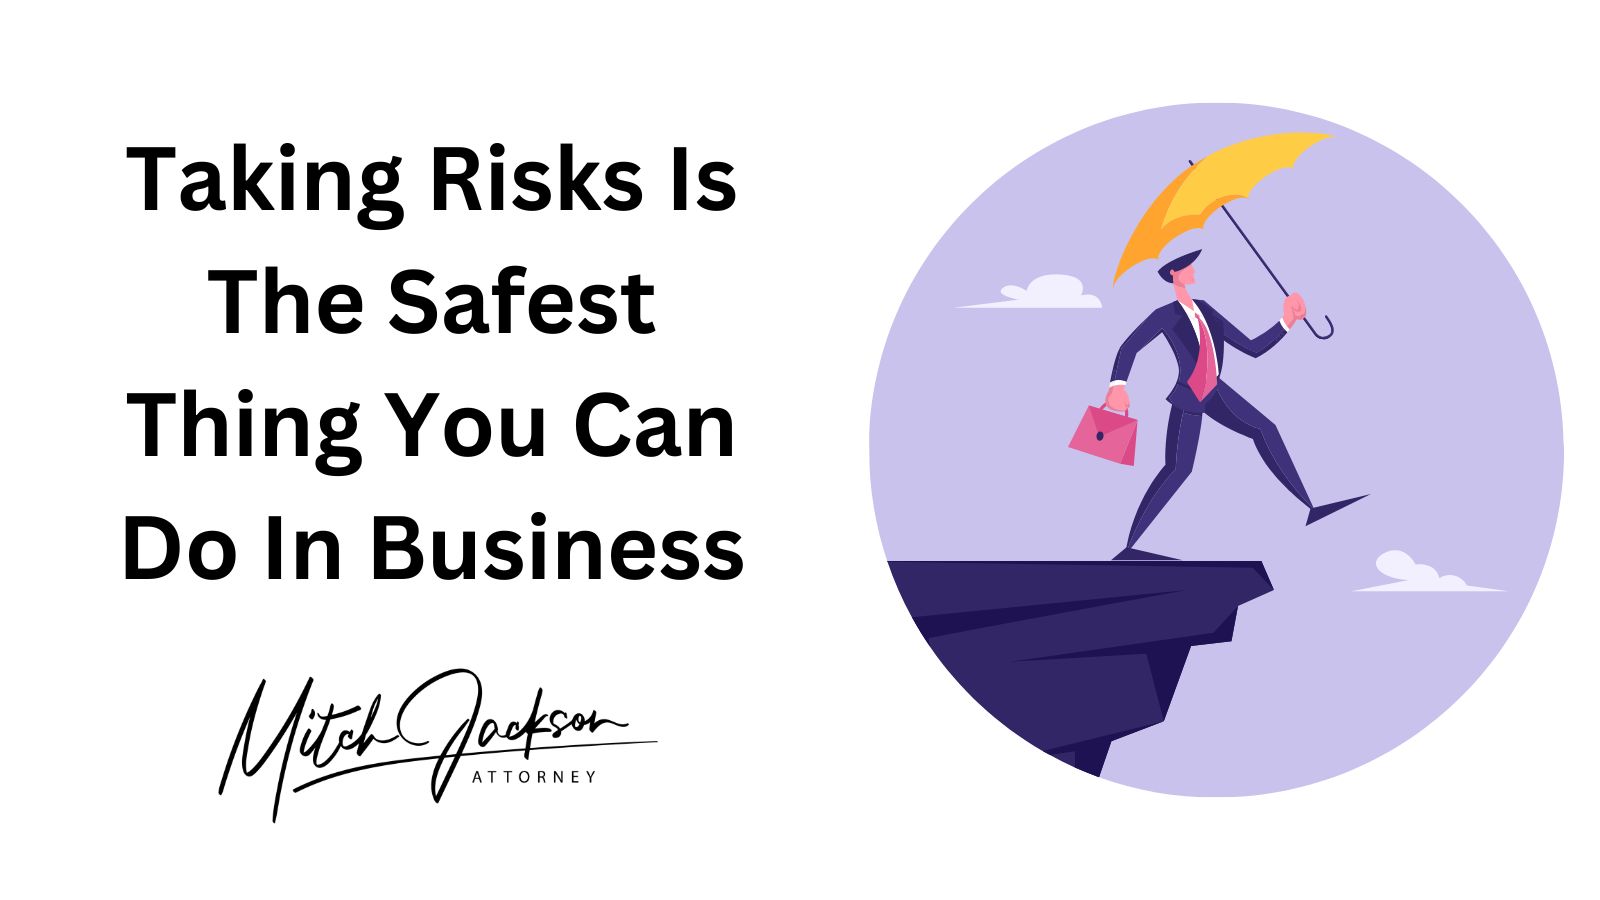 Taking Risks Is The Safest Thing You Can Do In Business